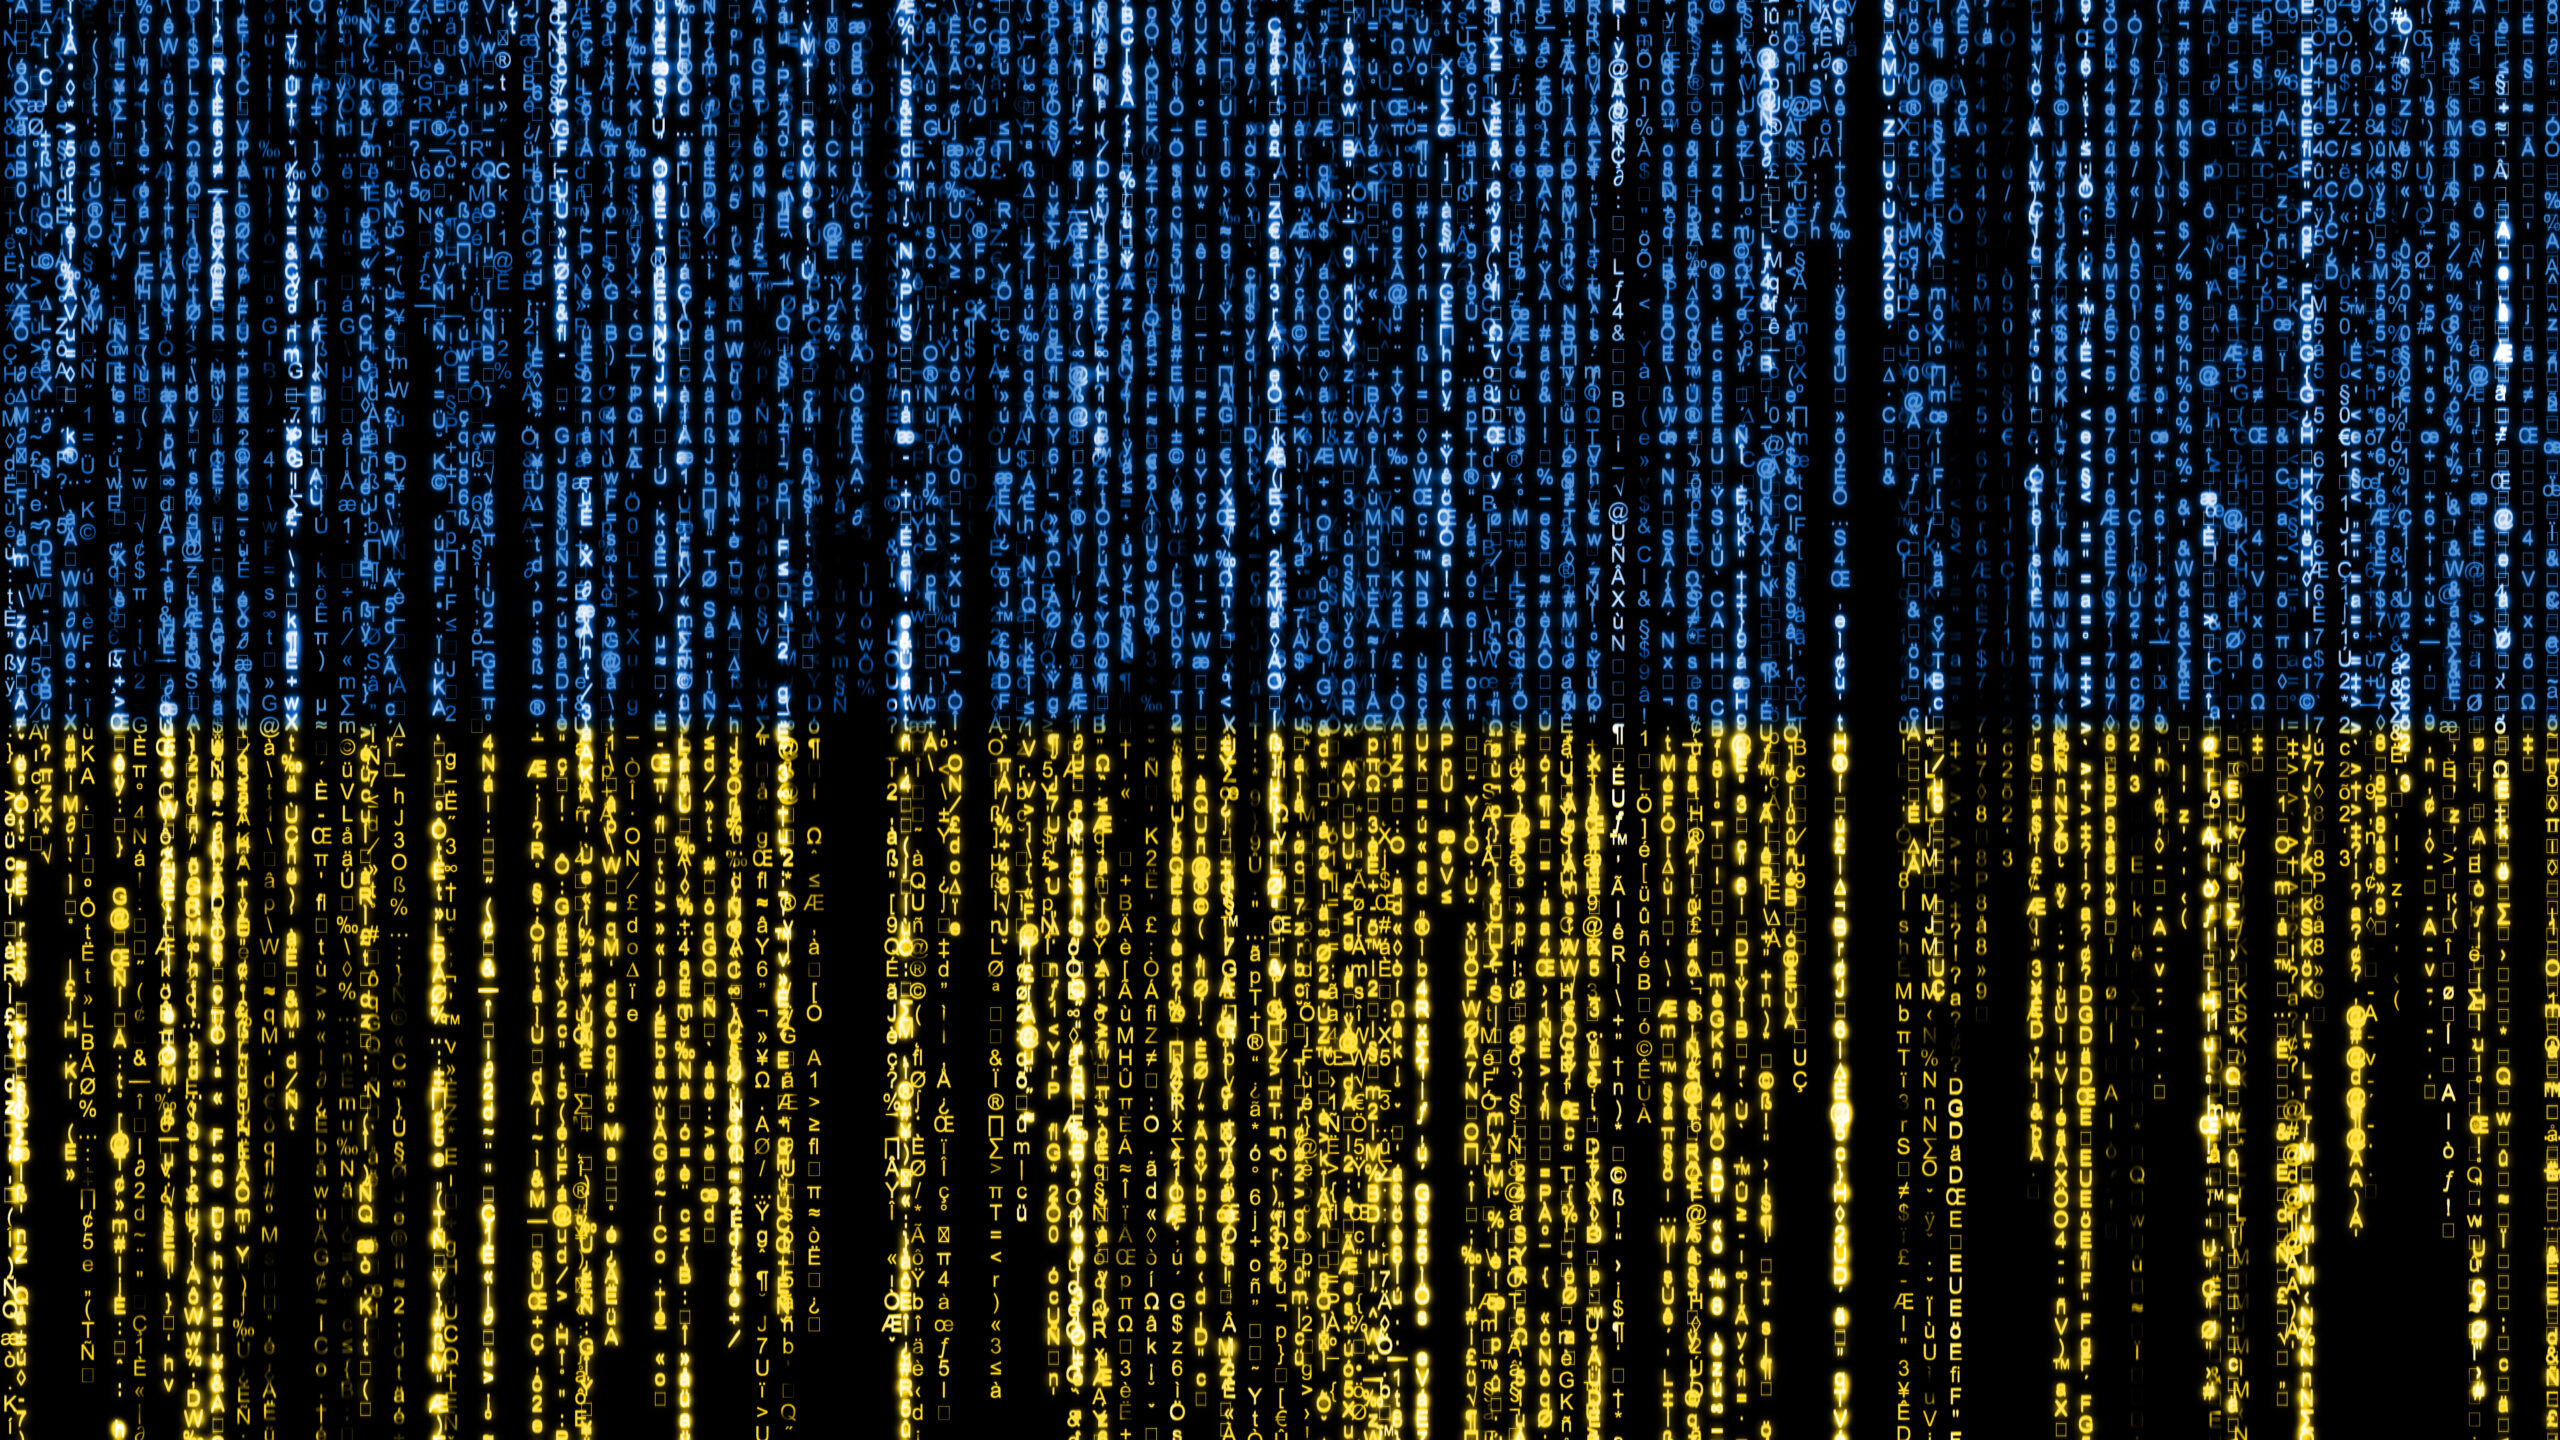 ‘No Big Bang’: Cyber successes in Ukraine are no cause for complacency in US